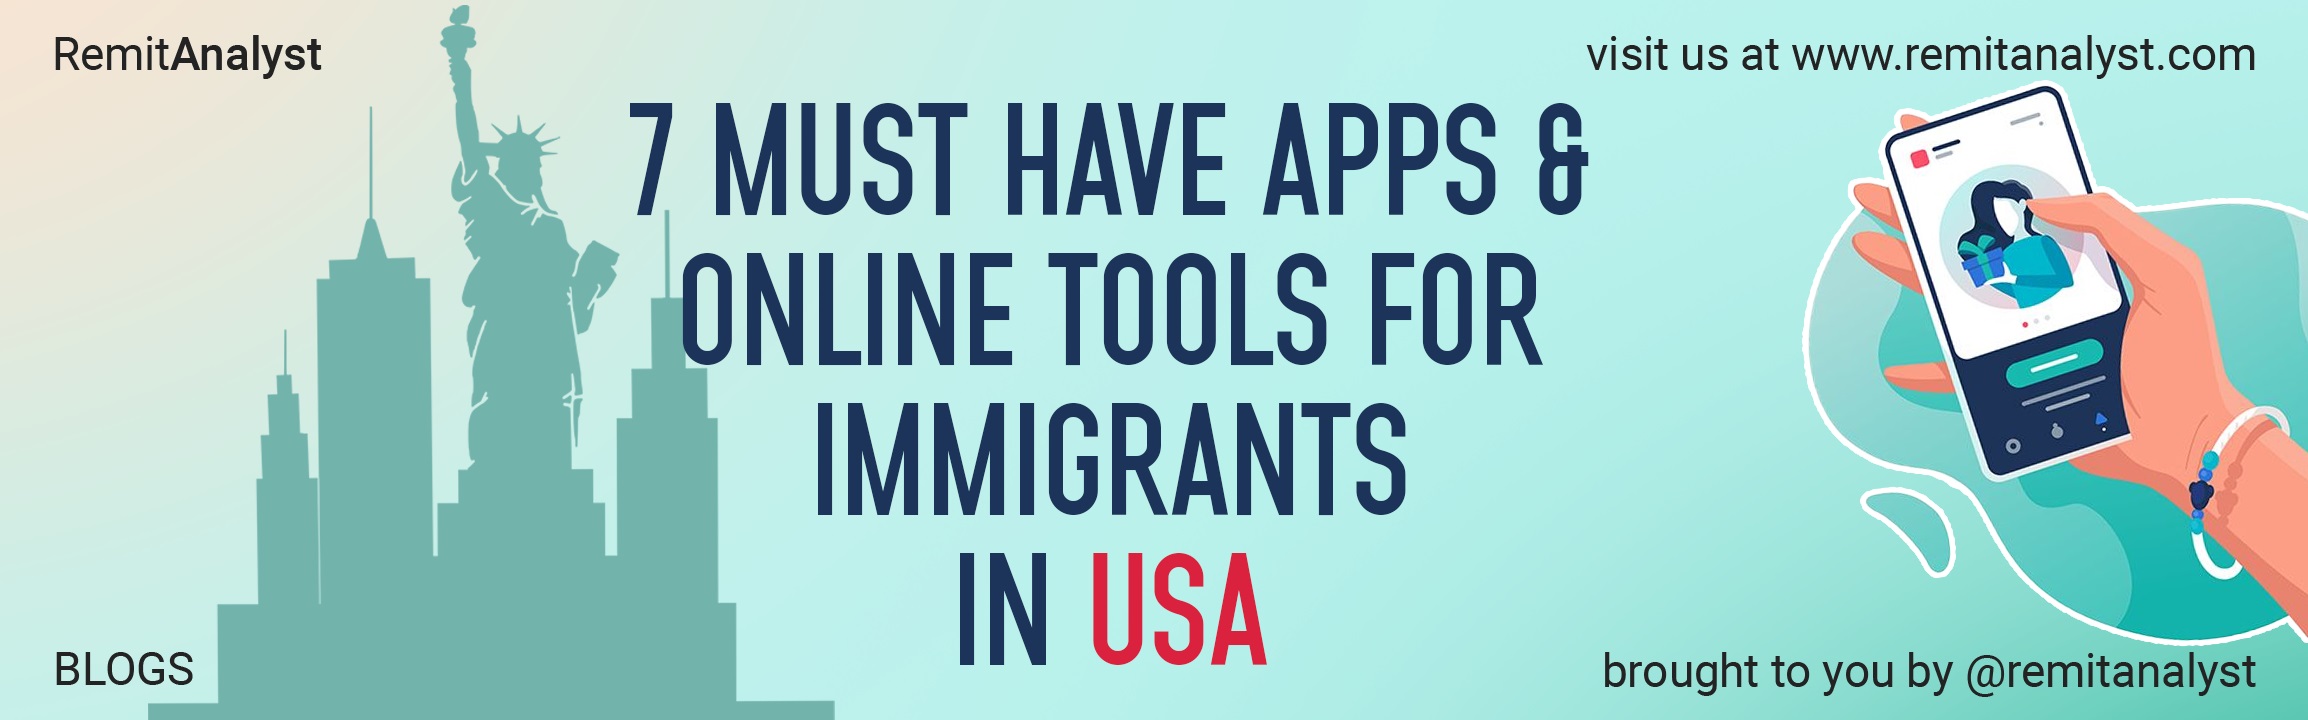 7-must-have-apps-and-online-tools-for-immigrants-in-usa-title